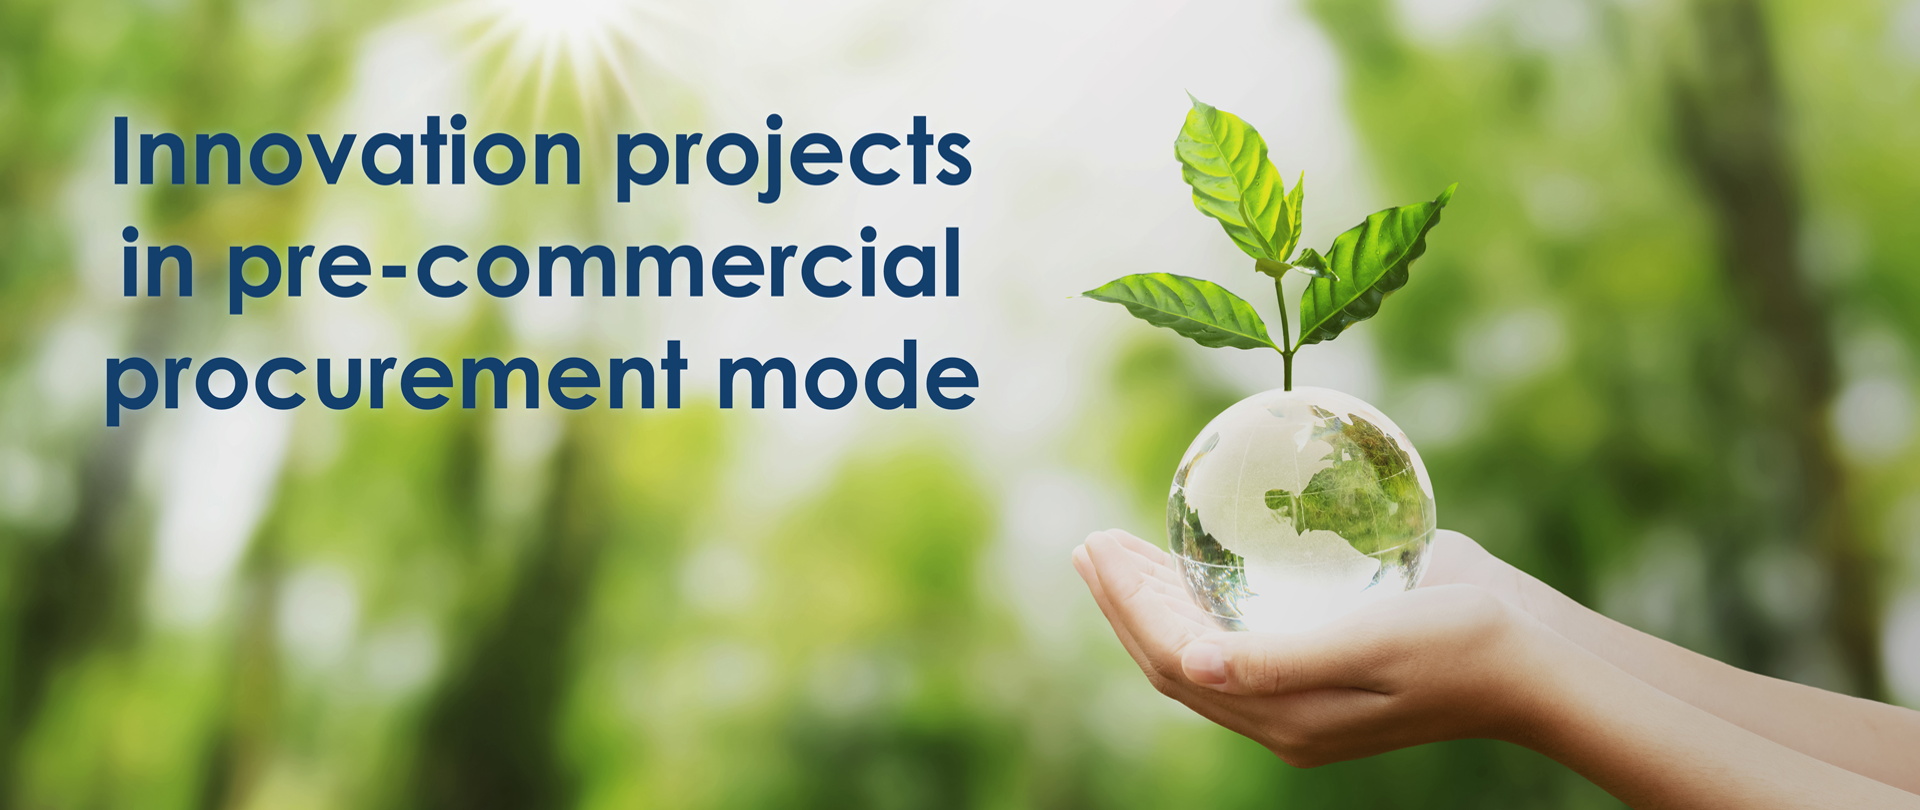 Innovation projects in pre-commercial procurement mode